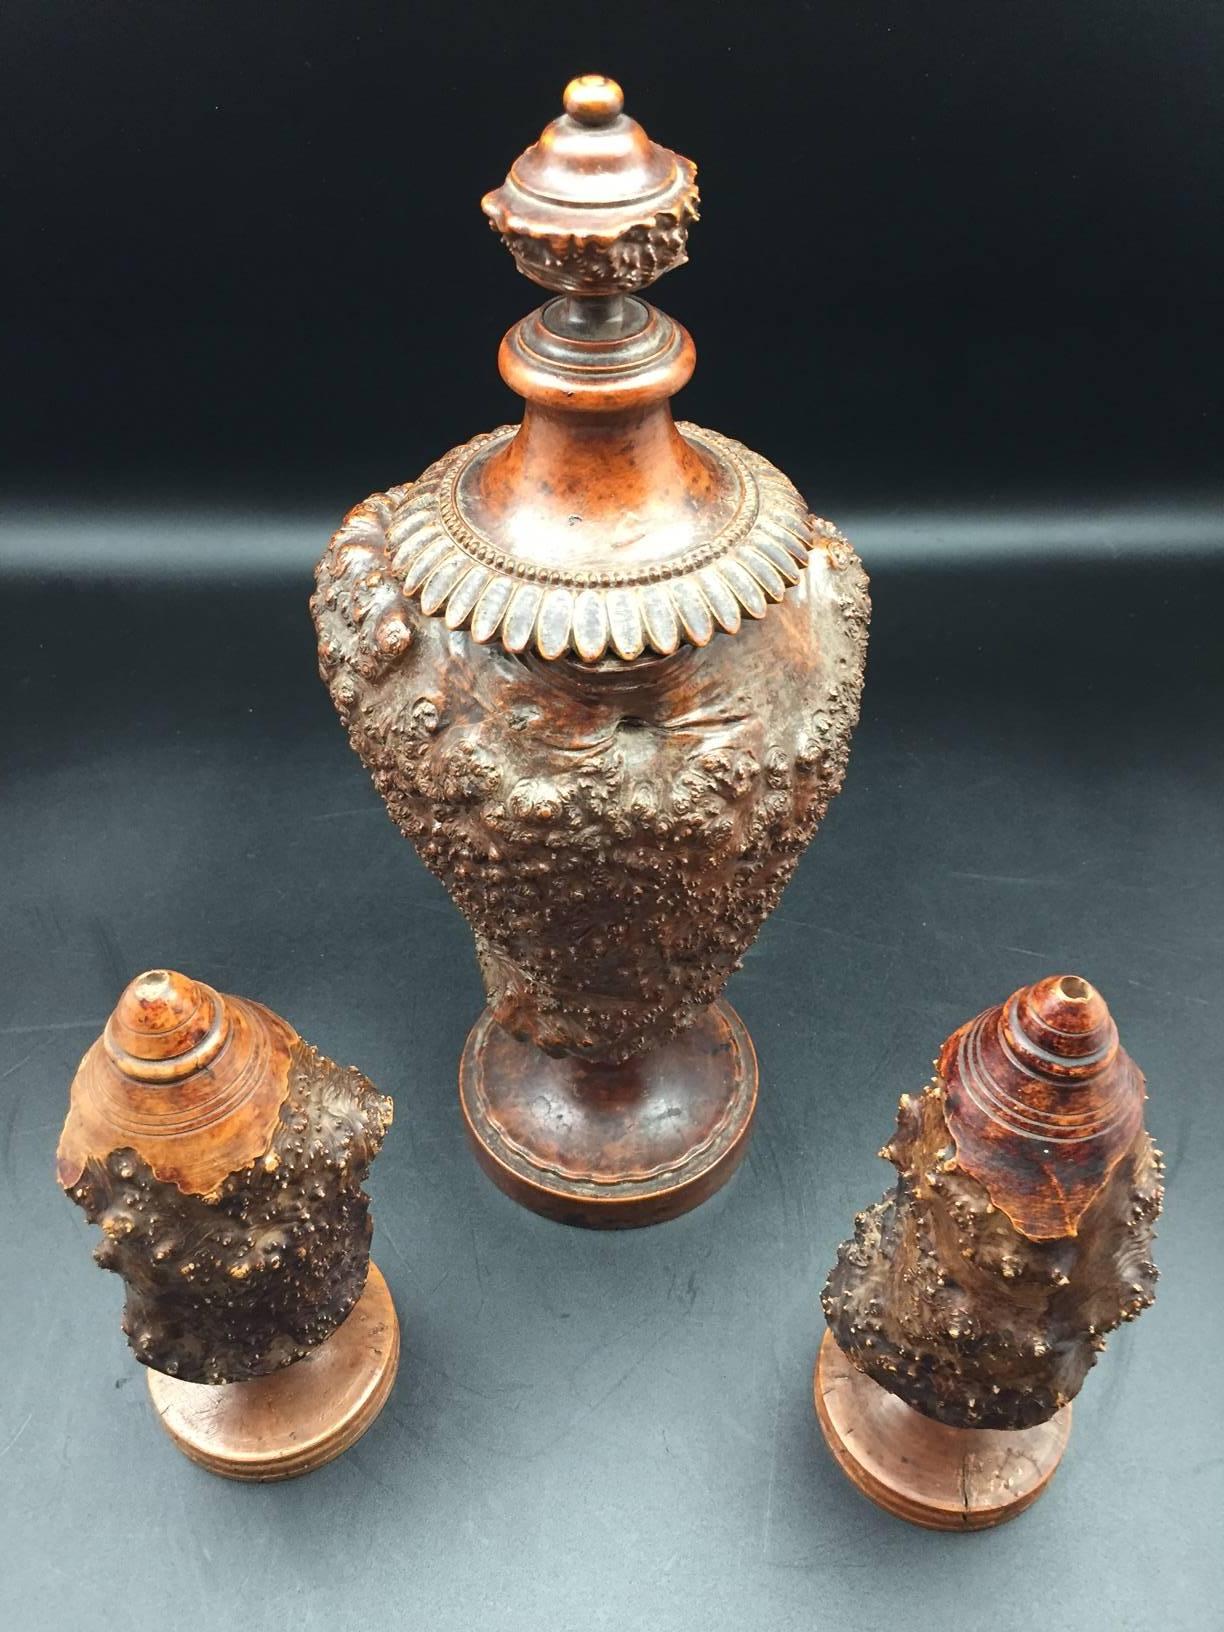 Burr or burl wood 19th century European garniture set of three turned jars. The larger of the three has a turned burl wood finial lid and the other two have turned wooden bases and a hole at the top indicating a possible use as a condiment set.